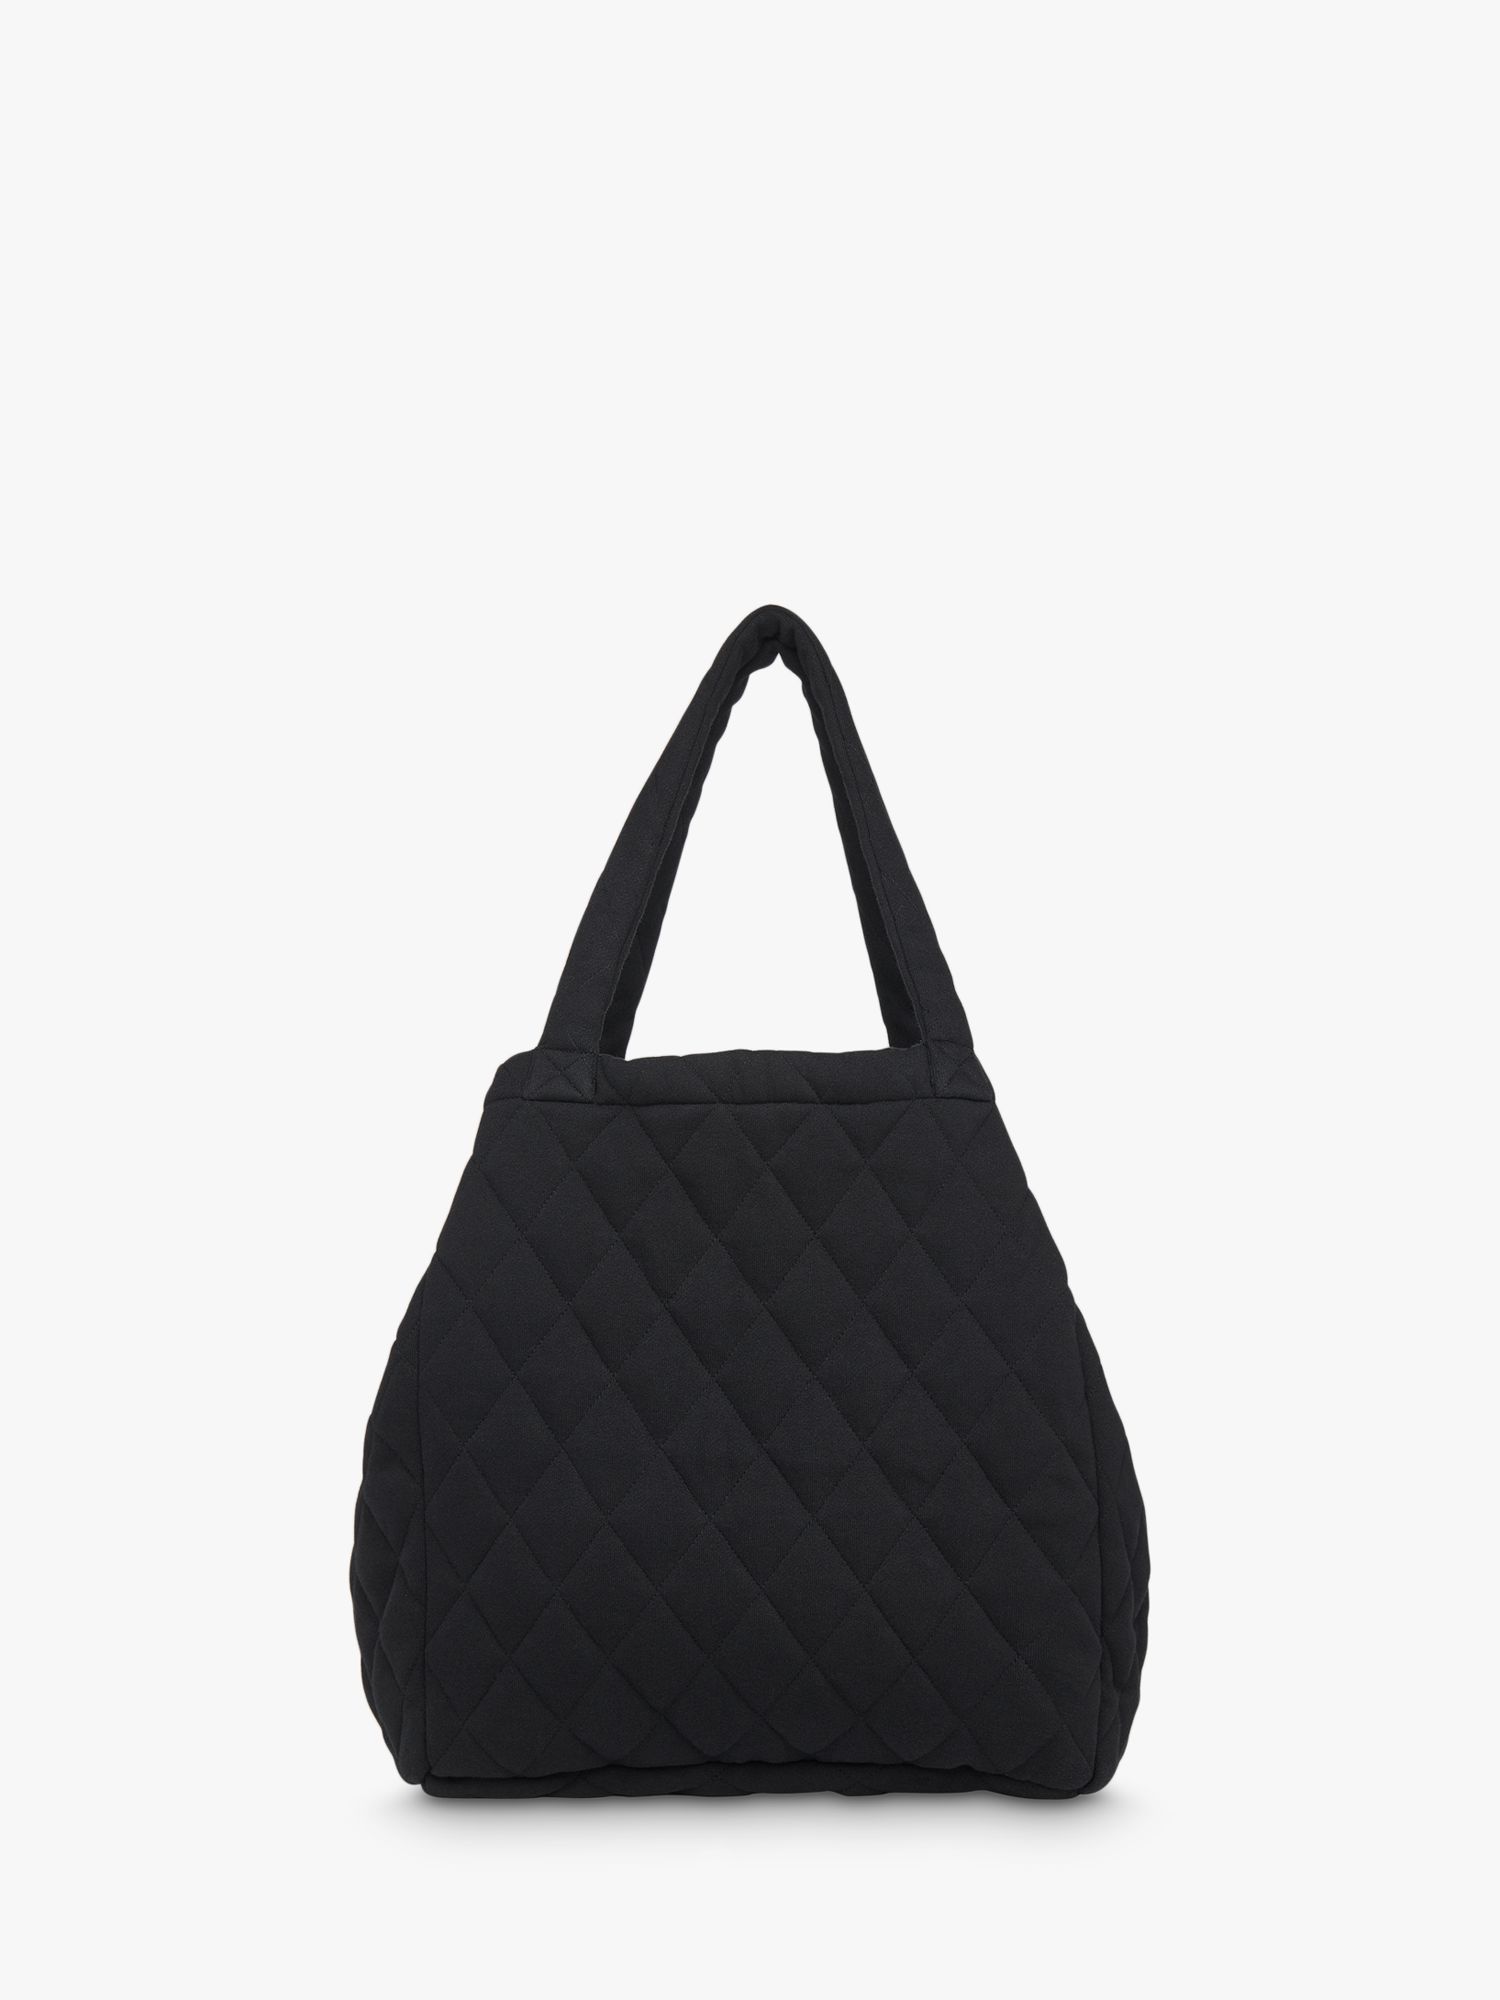 Whistles Lyle Quilted Tote Bag